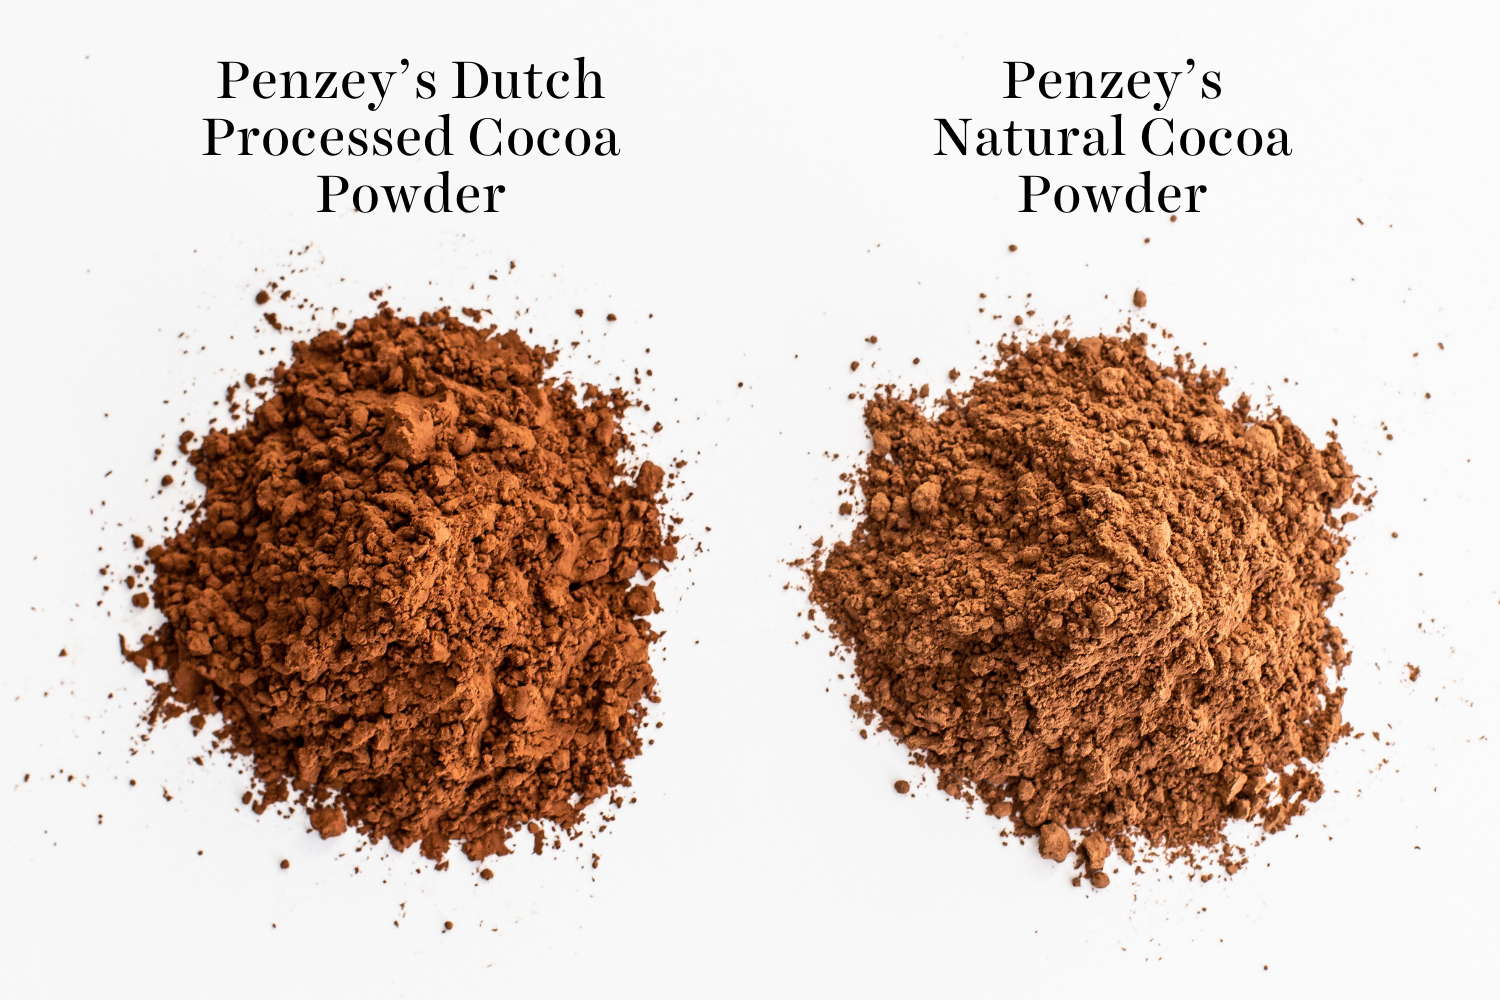 two piles of cocoa powder, both Penzey's brand - one Dutched and one natural.